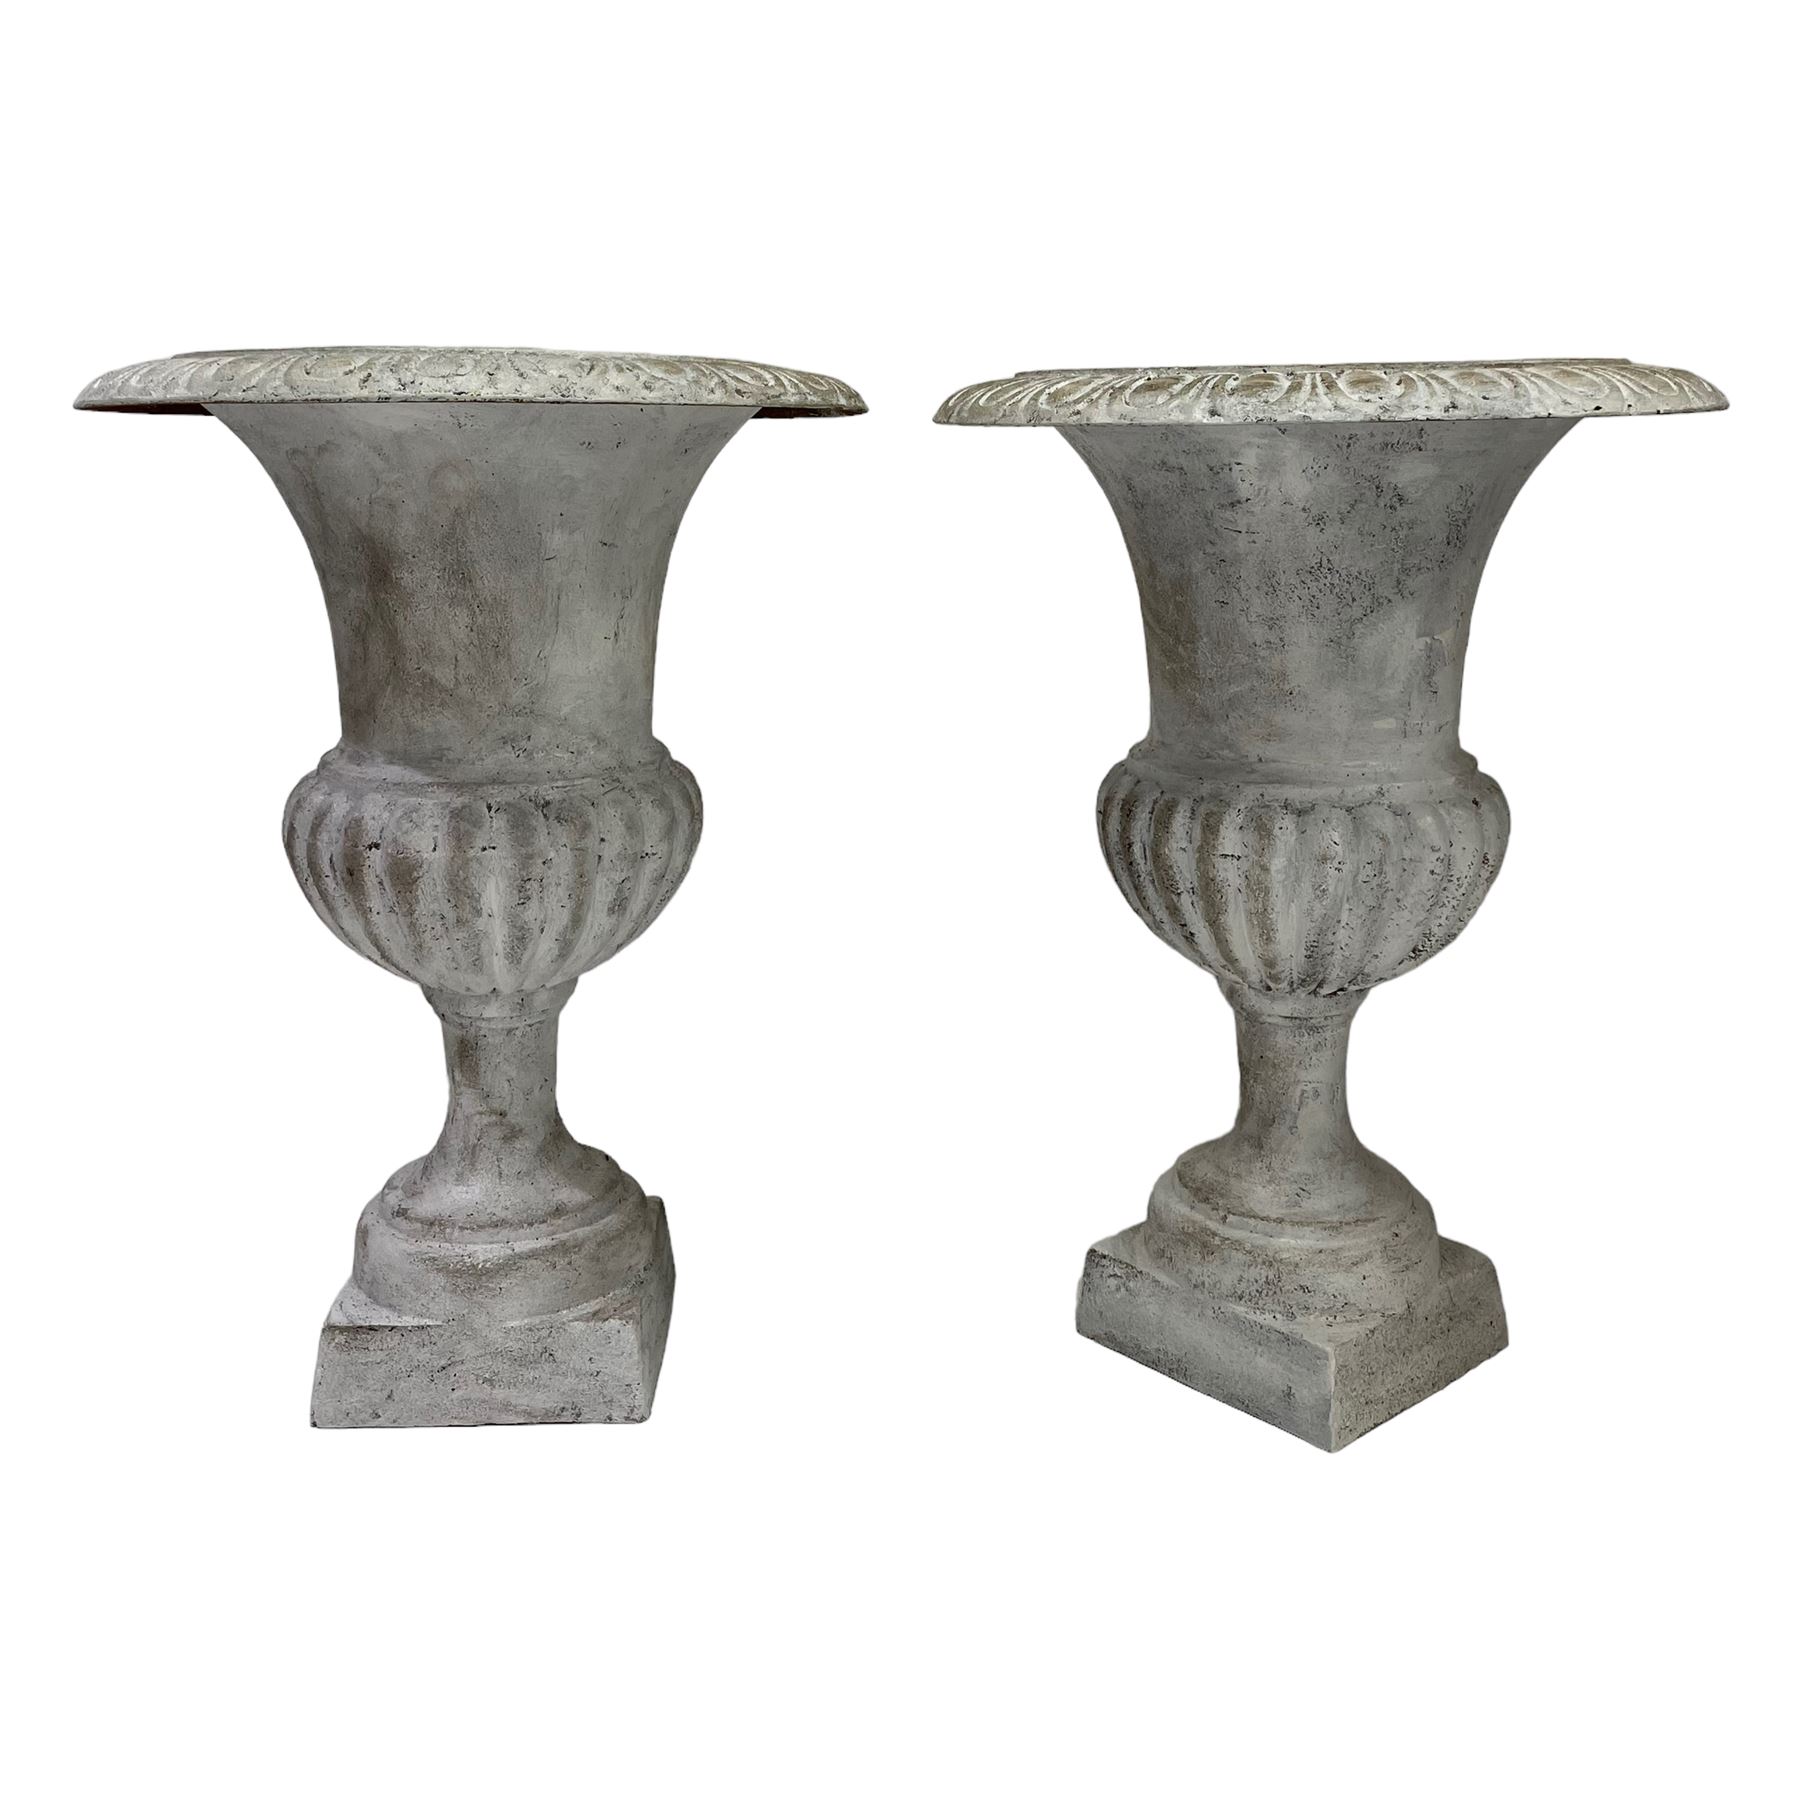 Pair of cast iron Campana shaped urns - Image 4 of 6